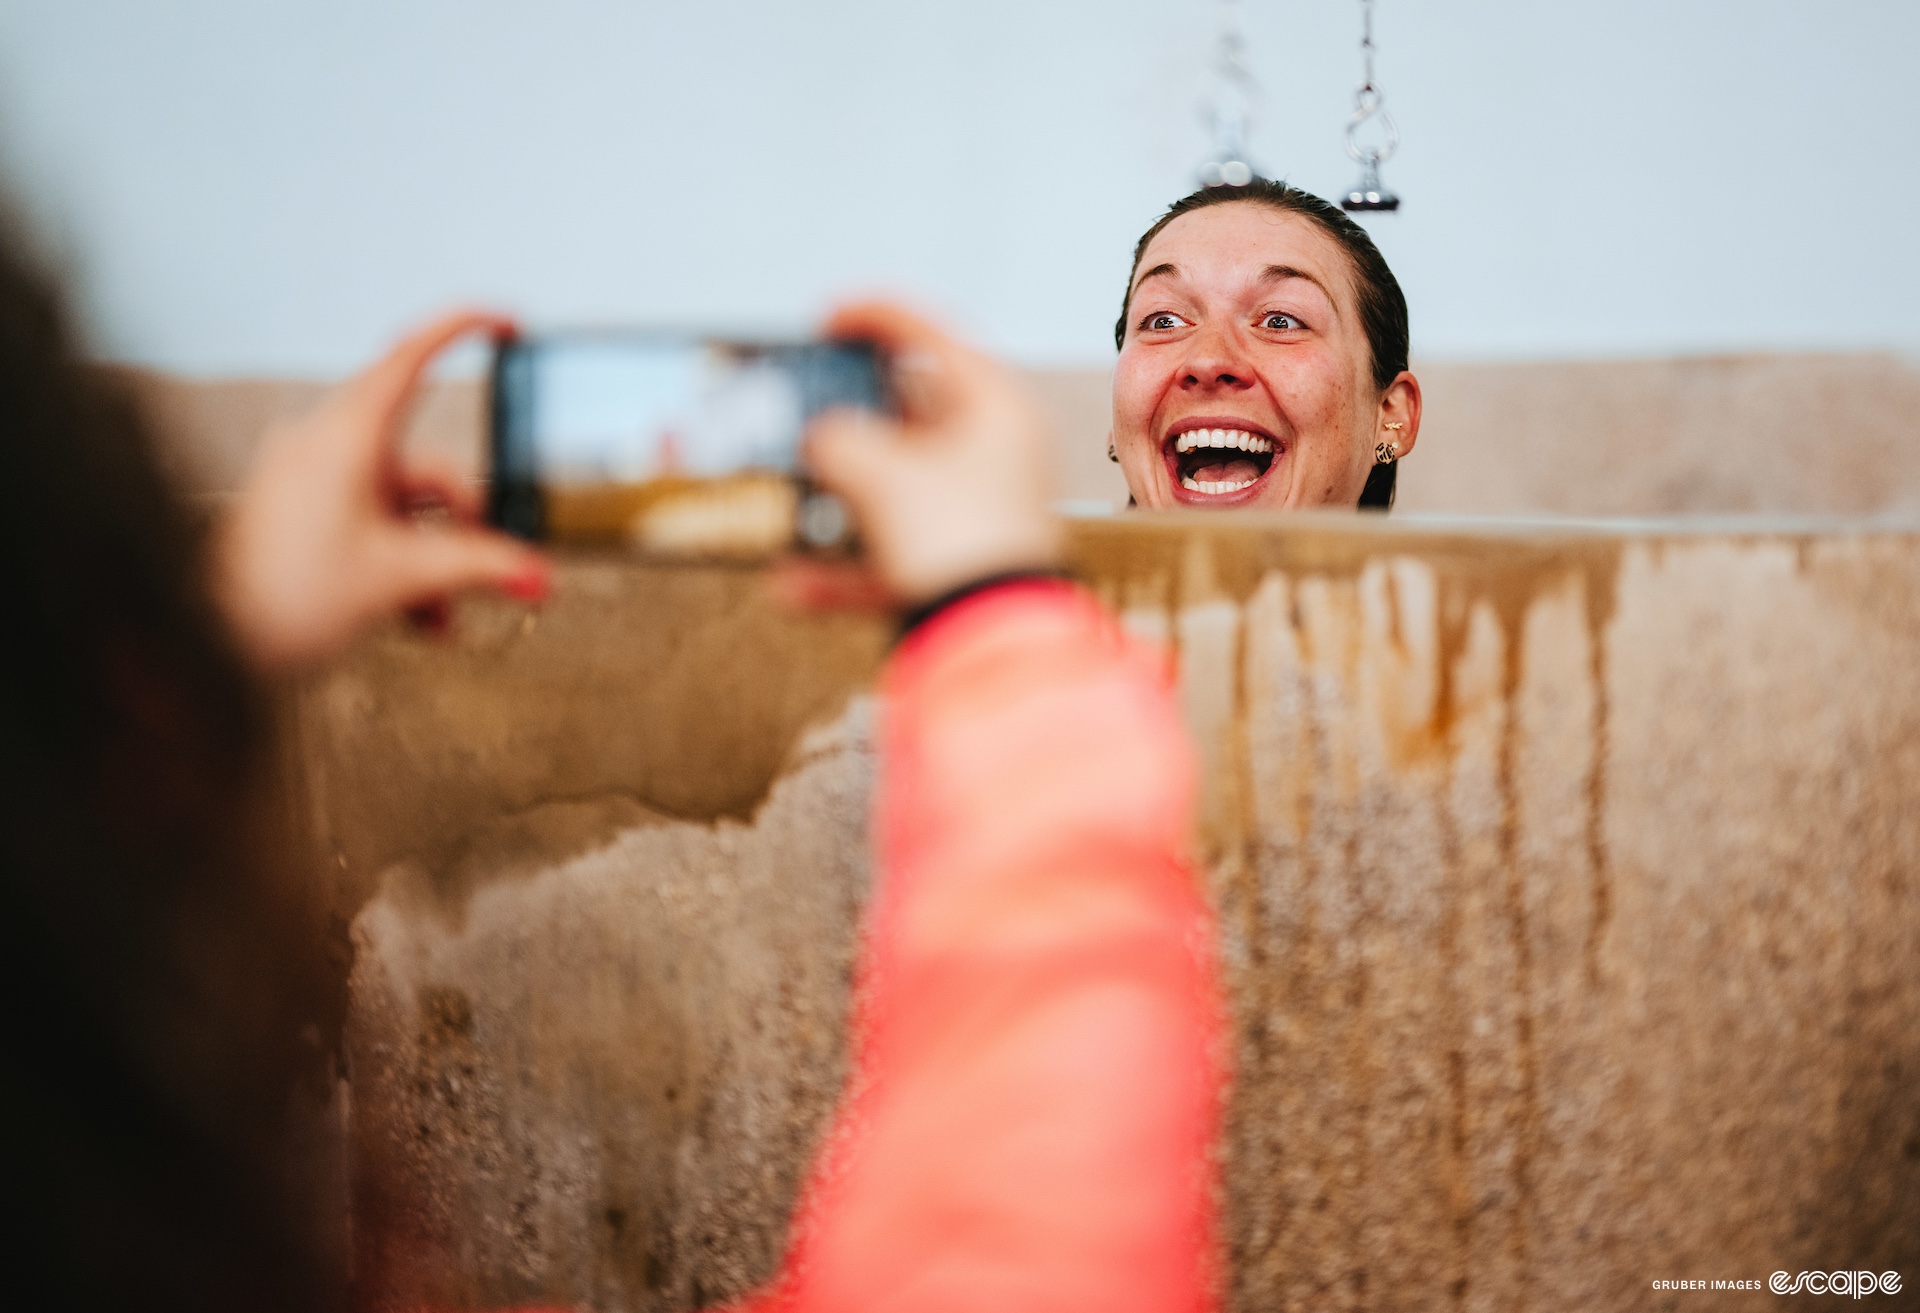 Alison Jackson smiles in the Roubaix velodrome showers. Her head peeks over the concrete walls as someone snaps a cellphone photo.